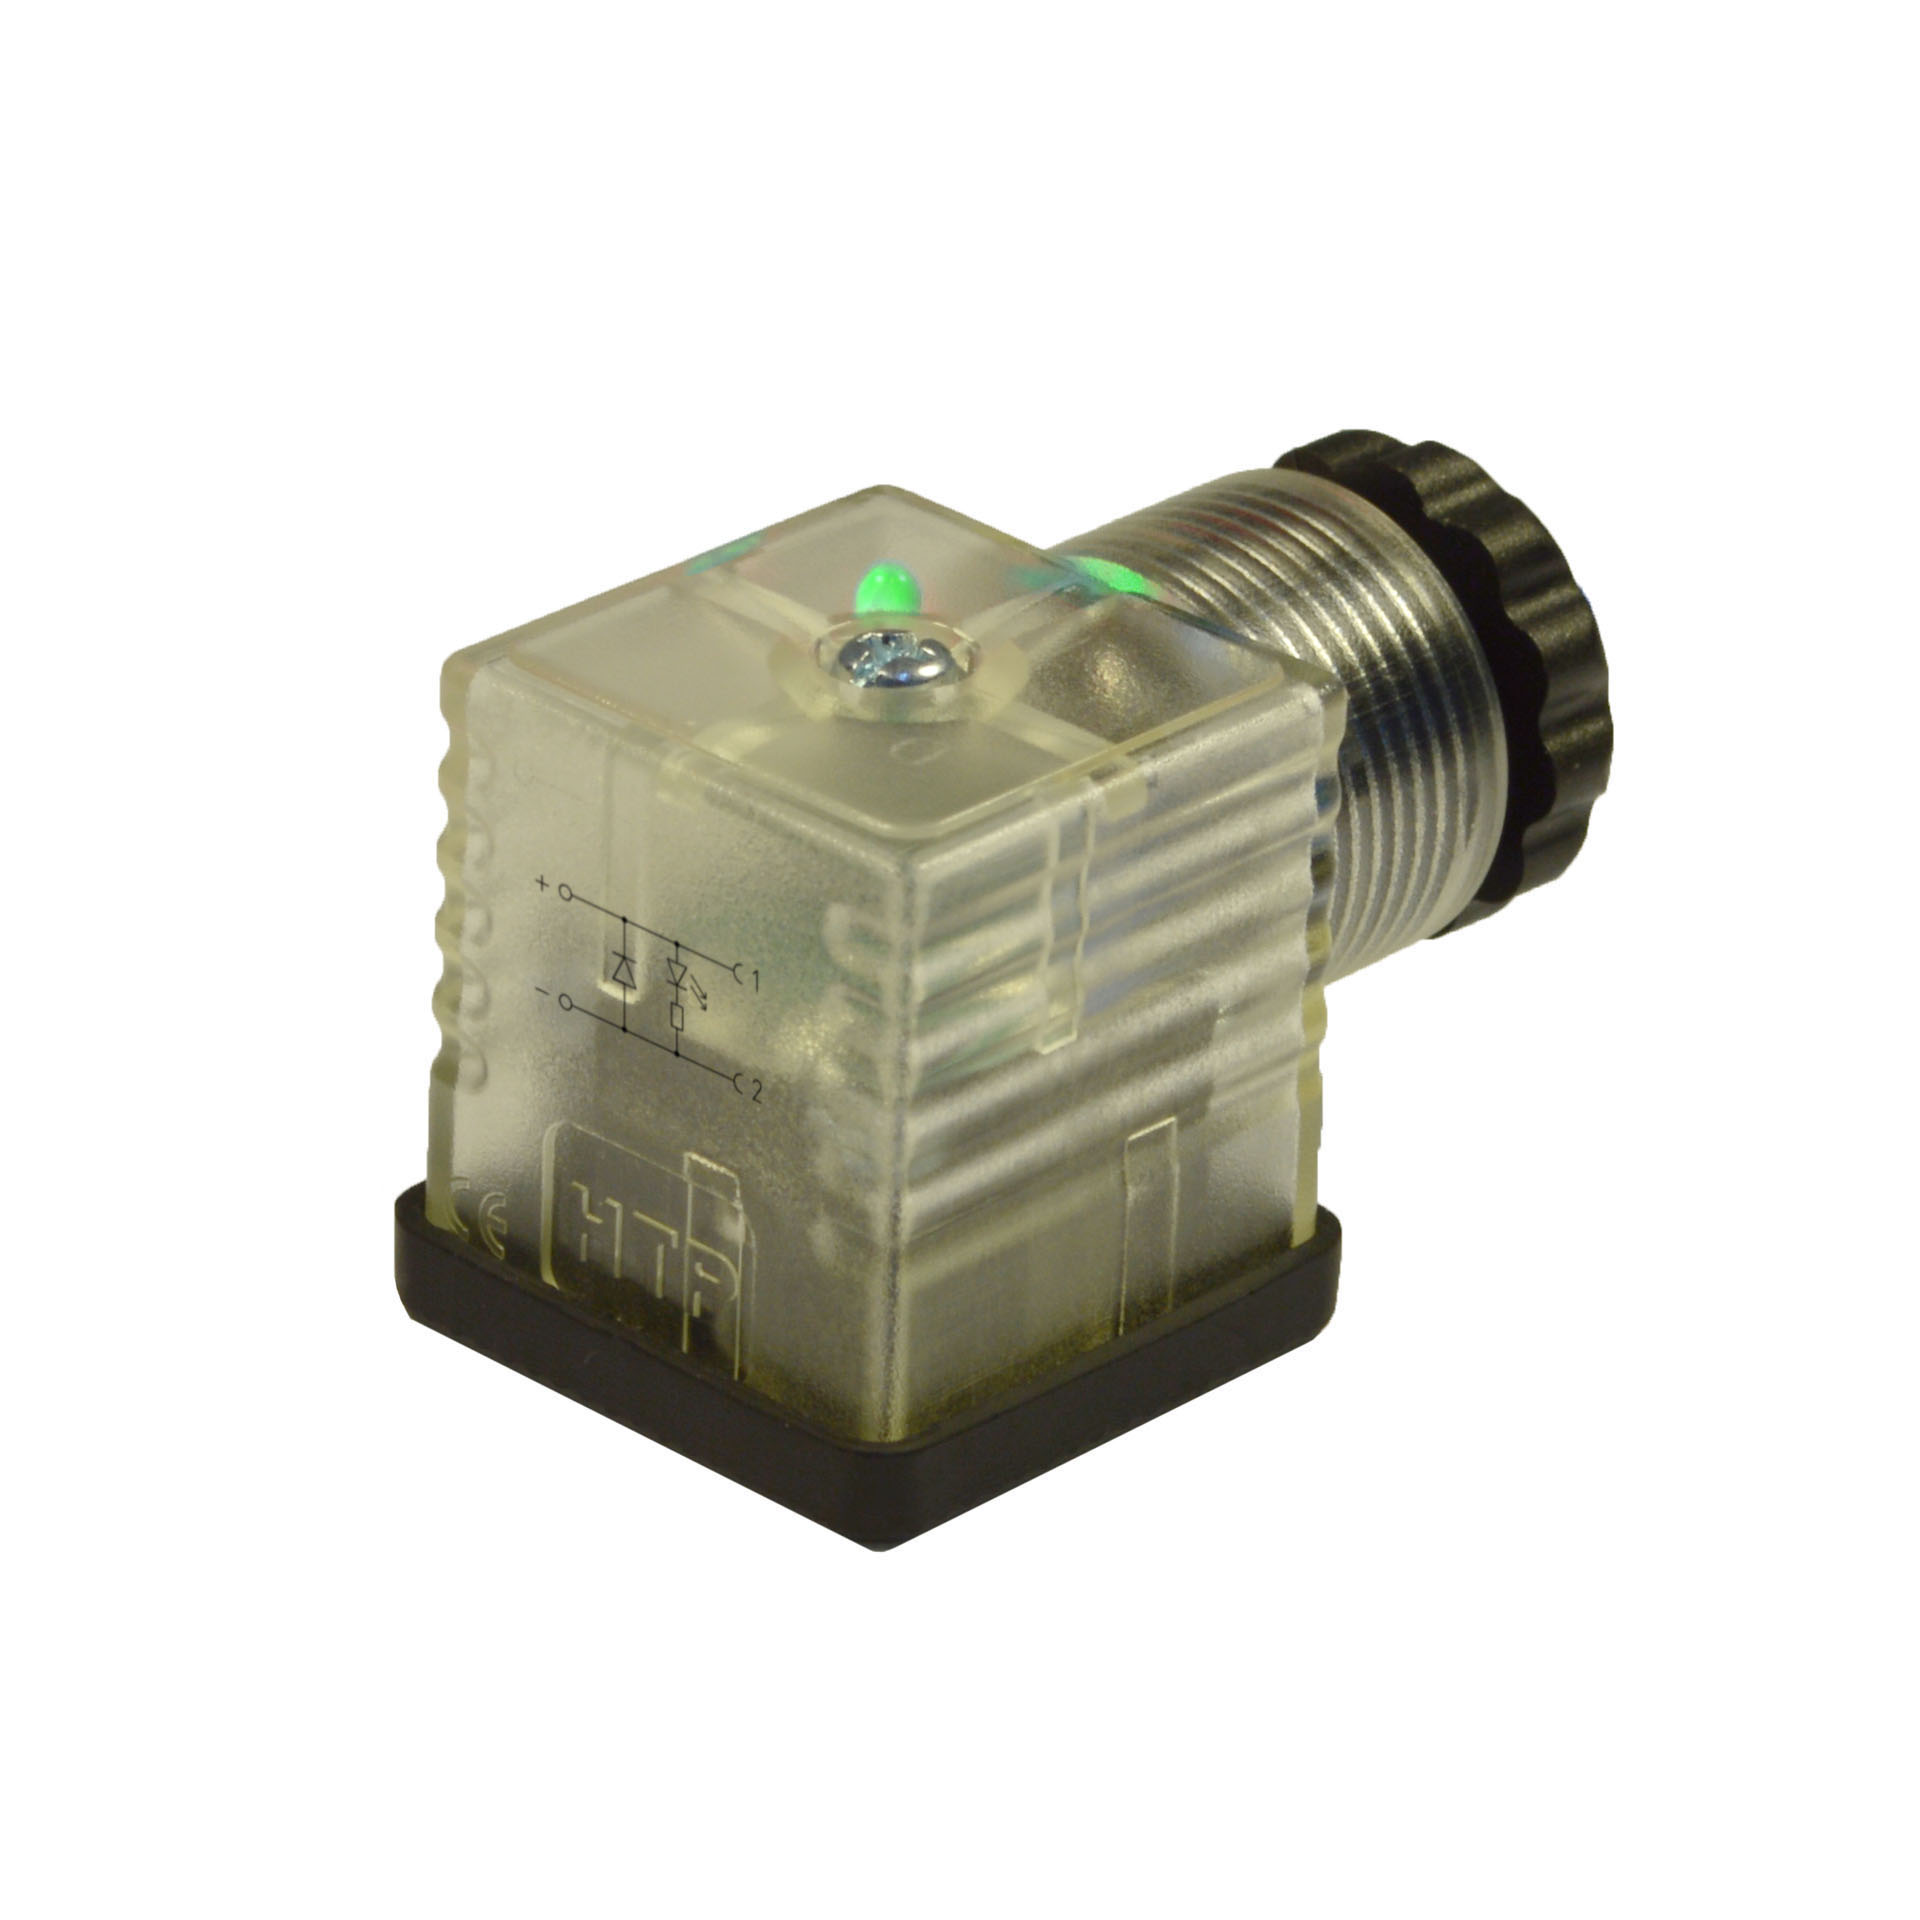 EN175301-803(typeA)field attachable,2p+PE(h.12),Green LED+diode,24VDC,PG9/11unif.